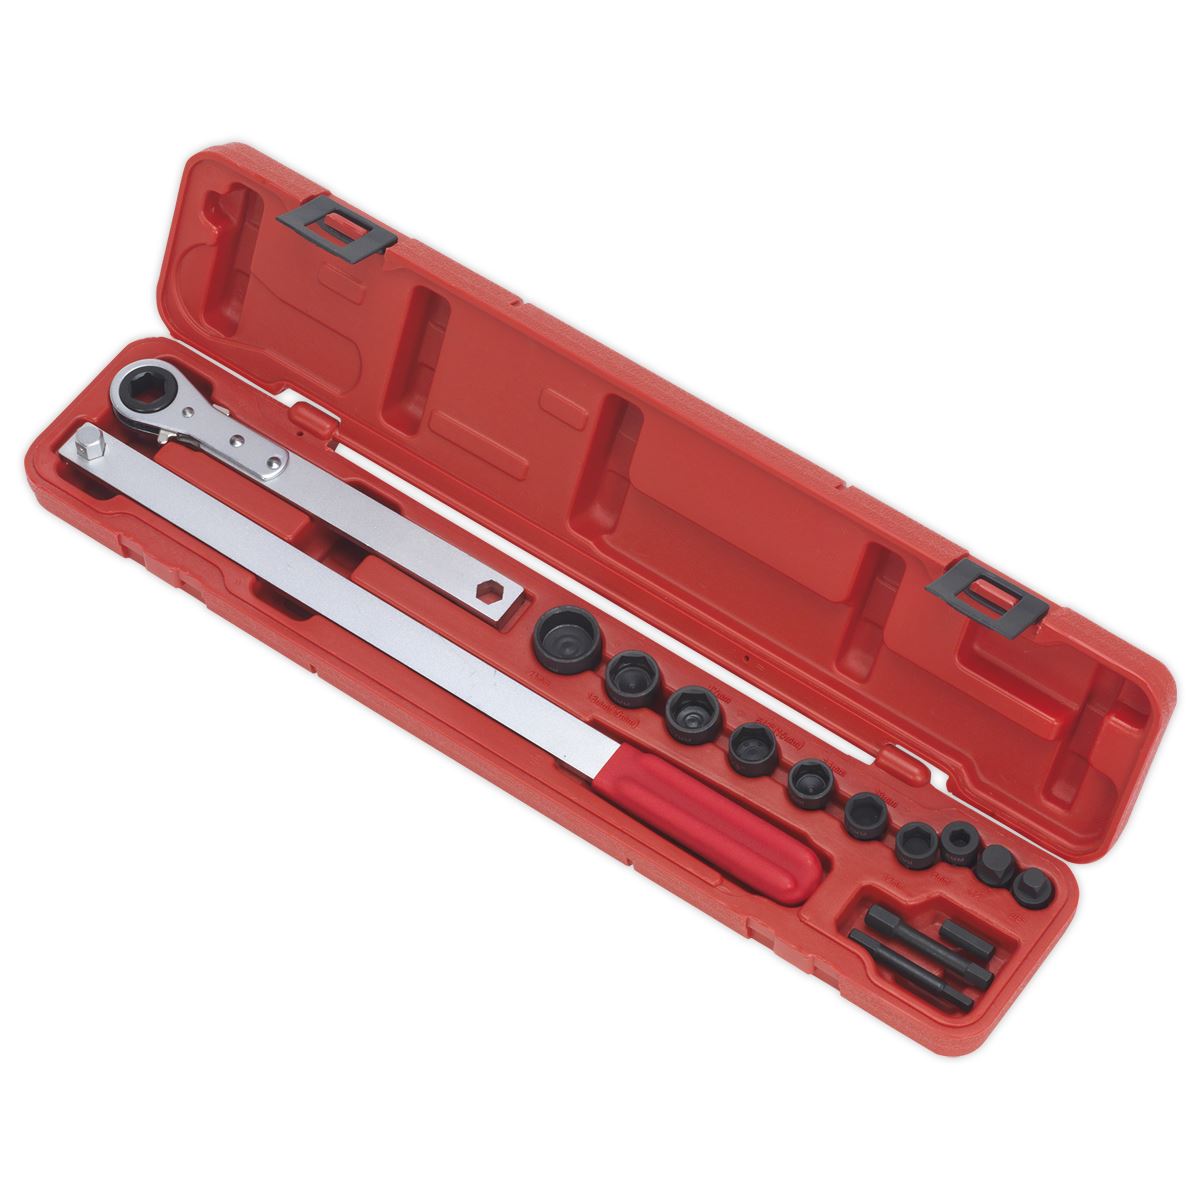 Sealey Ratchet Action Auxiliary Belt Tension Tool Kit